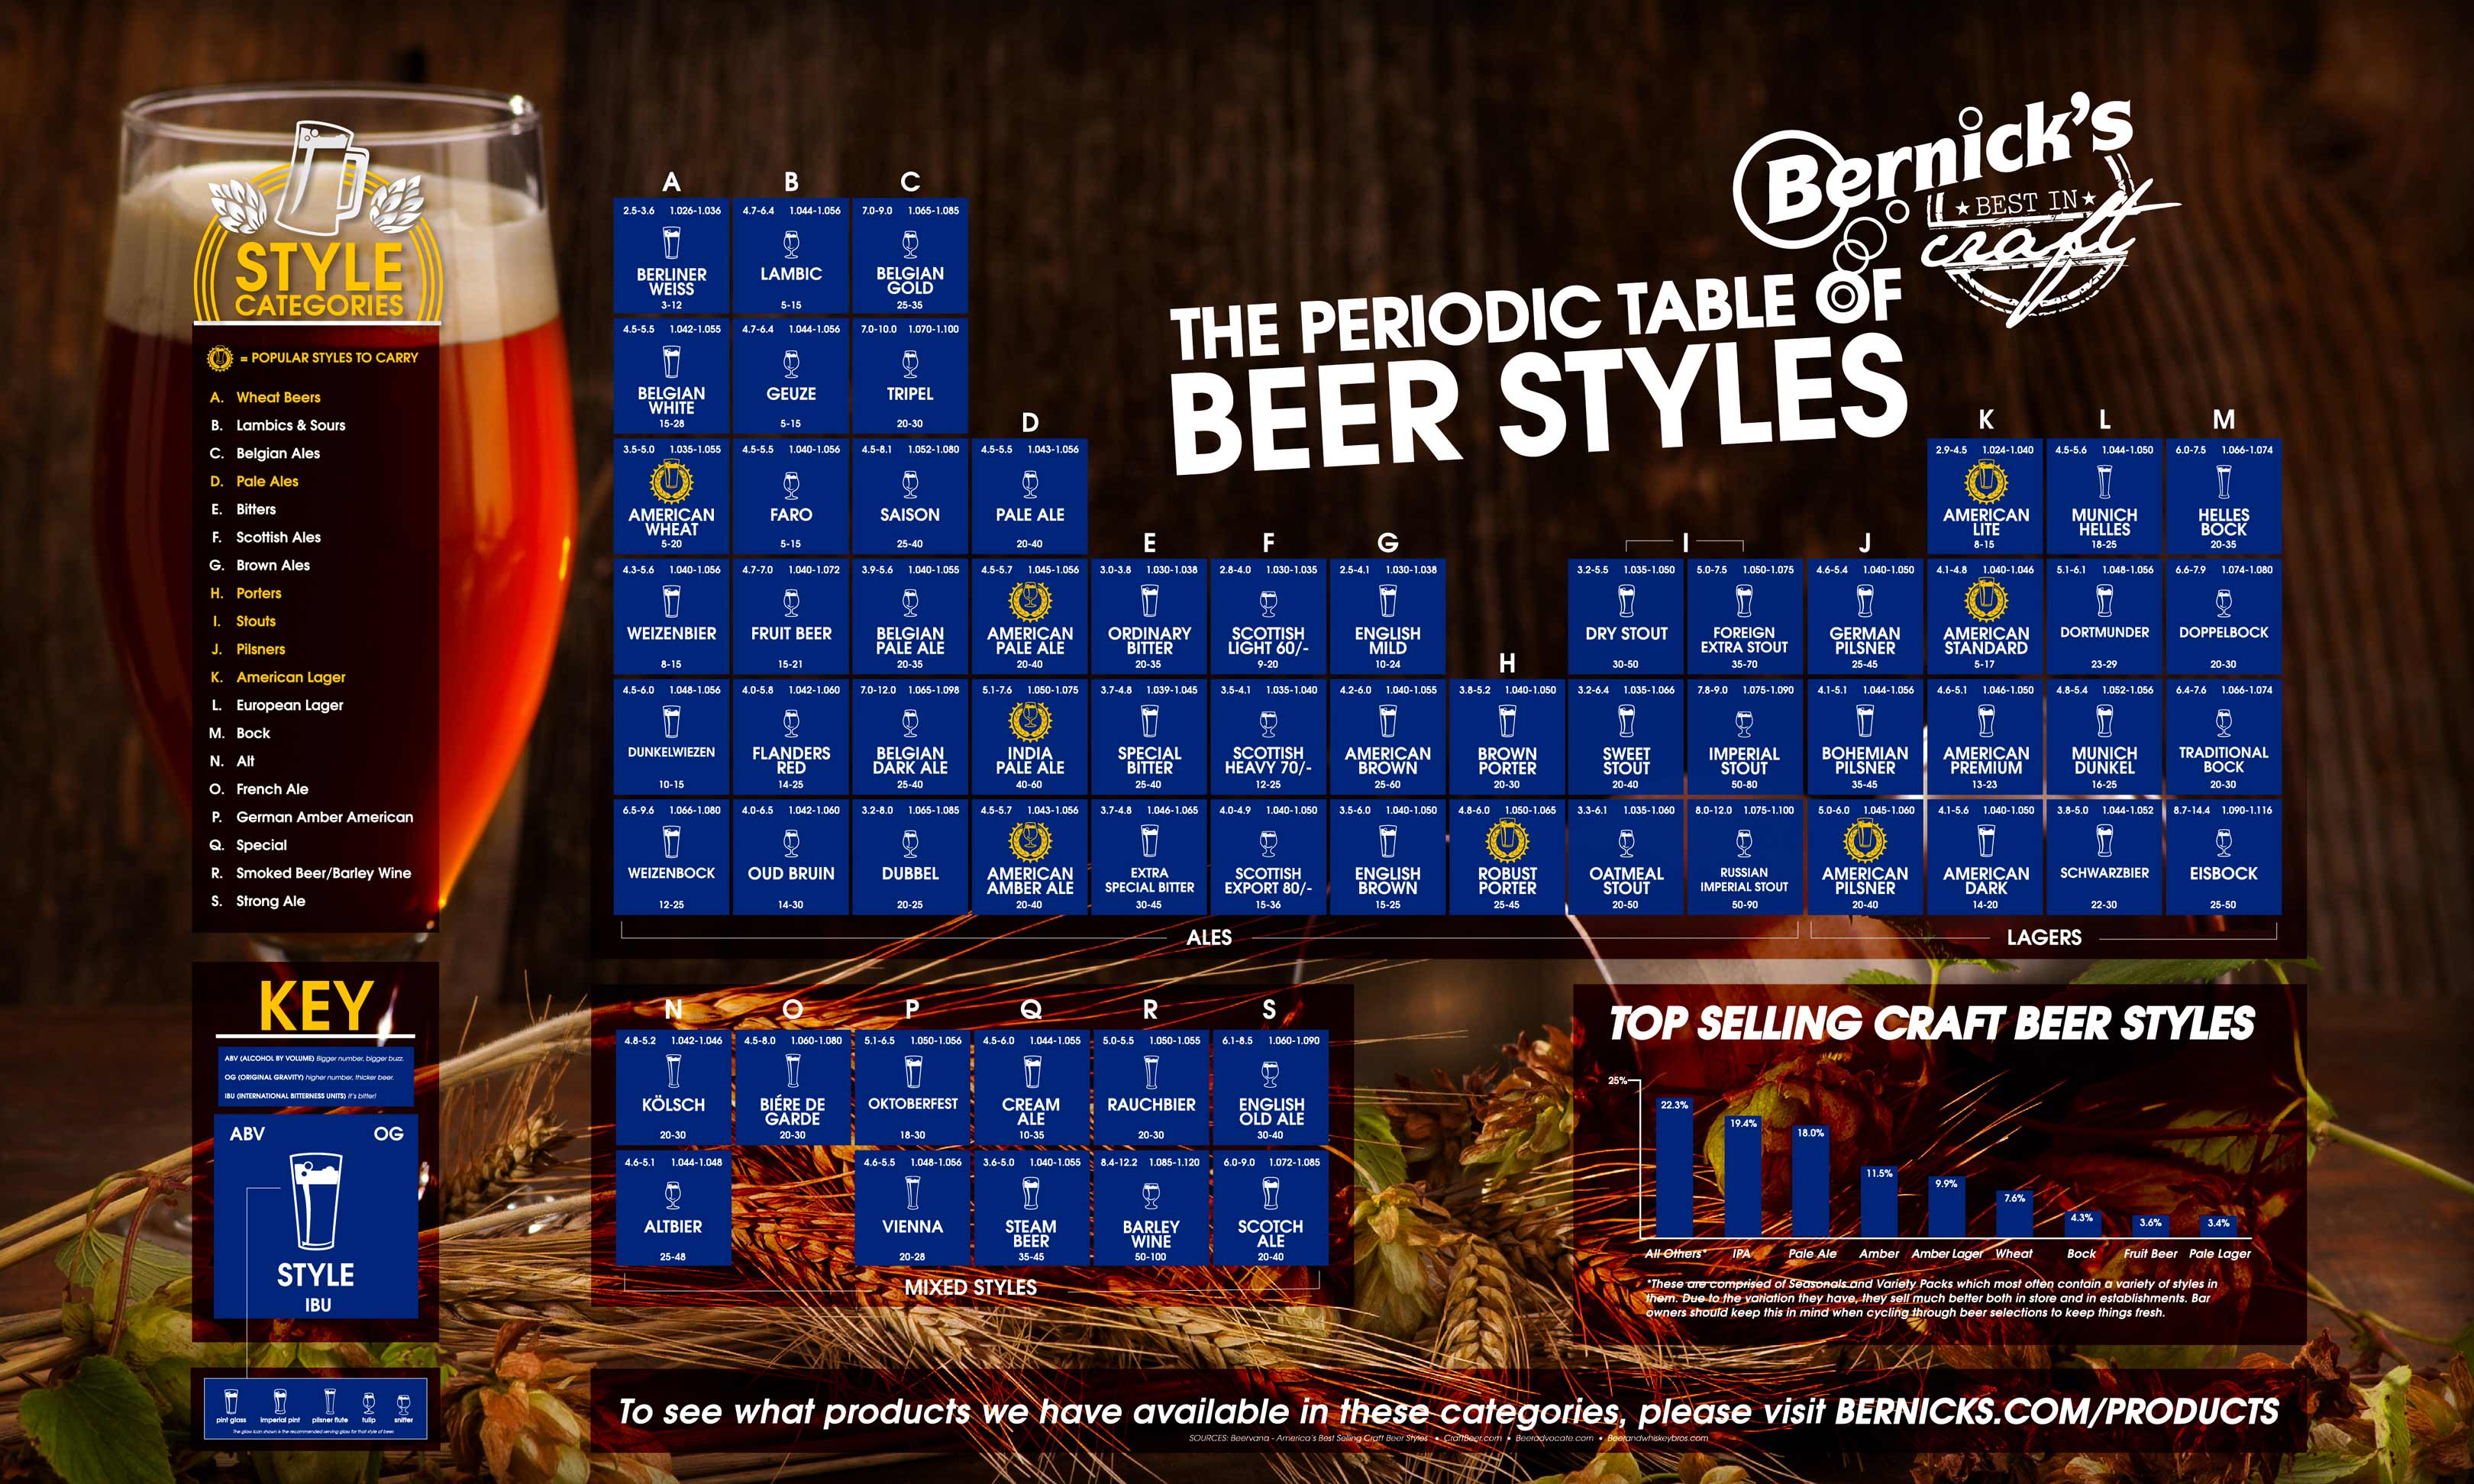 Bernick's Periodic Table of Beer